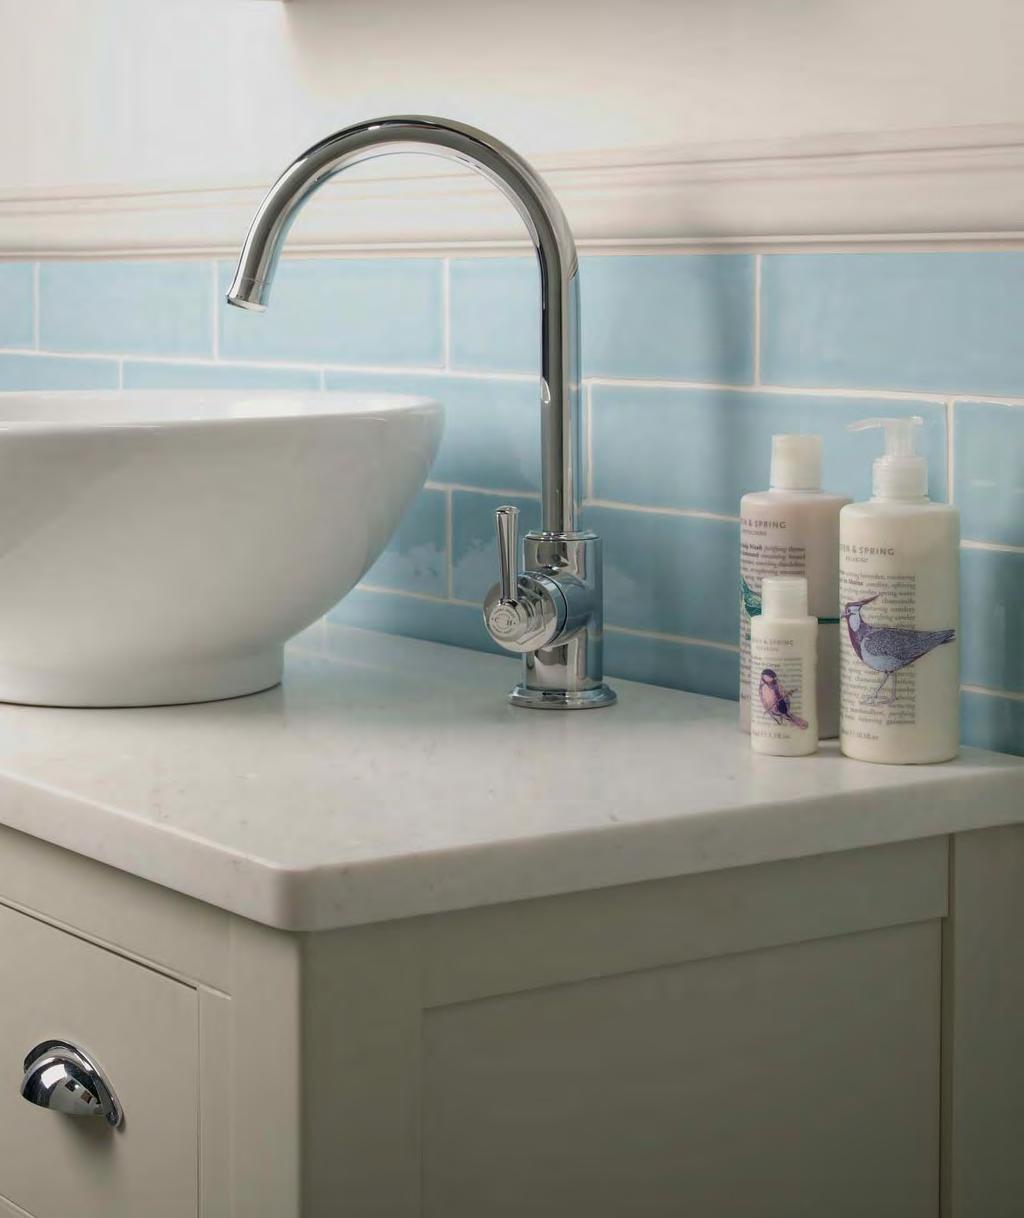 and are registered trademarks used under license from Laura Ashley Ltd. Laura Ashley Bathroom Collection Brassmill Lane Trading Estate, Bath, BA1 3JF sales@lauraashleybathroomcollection.